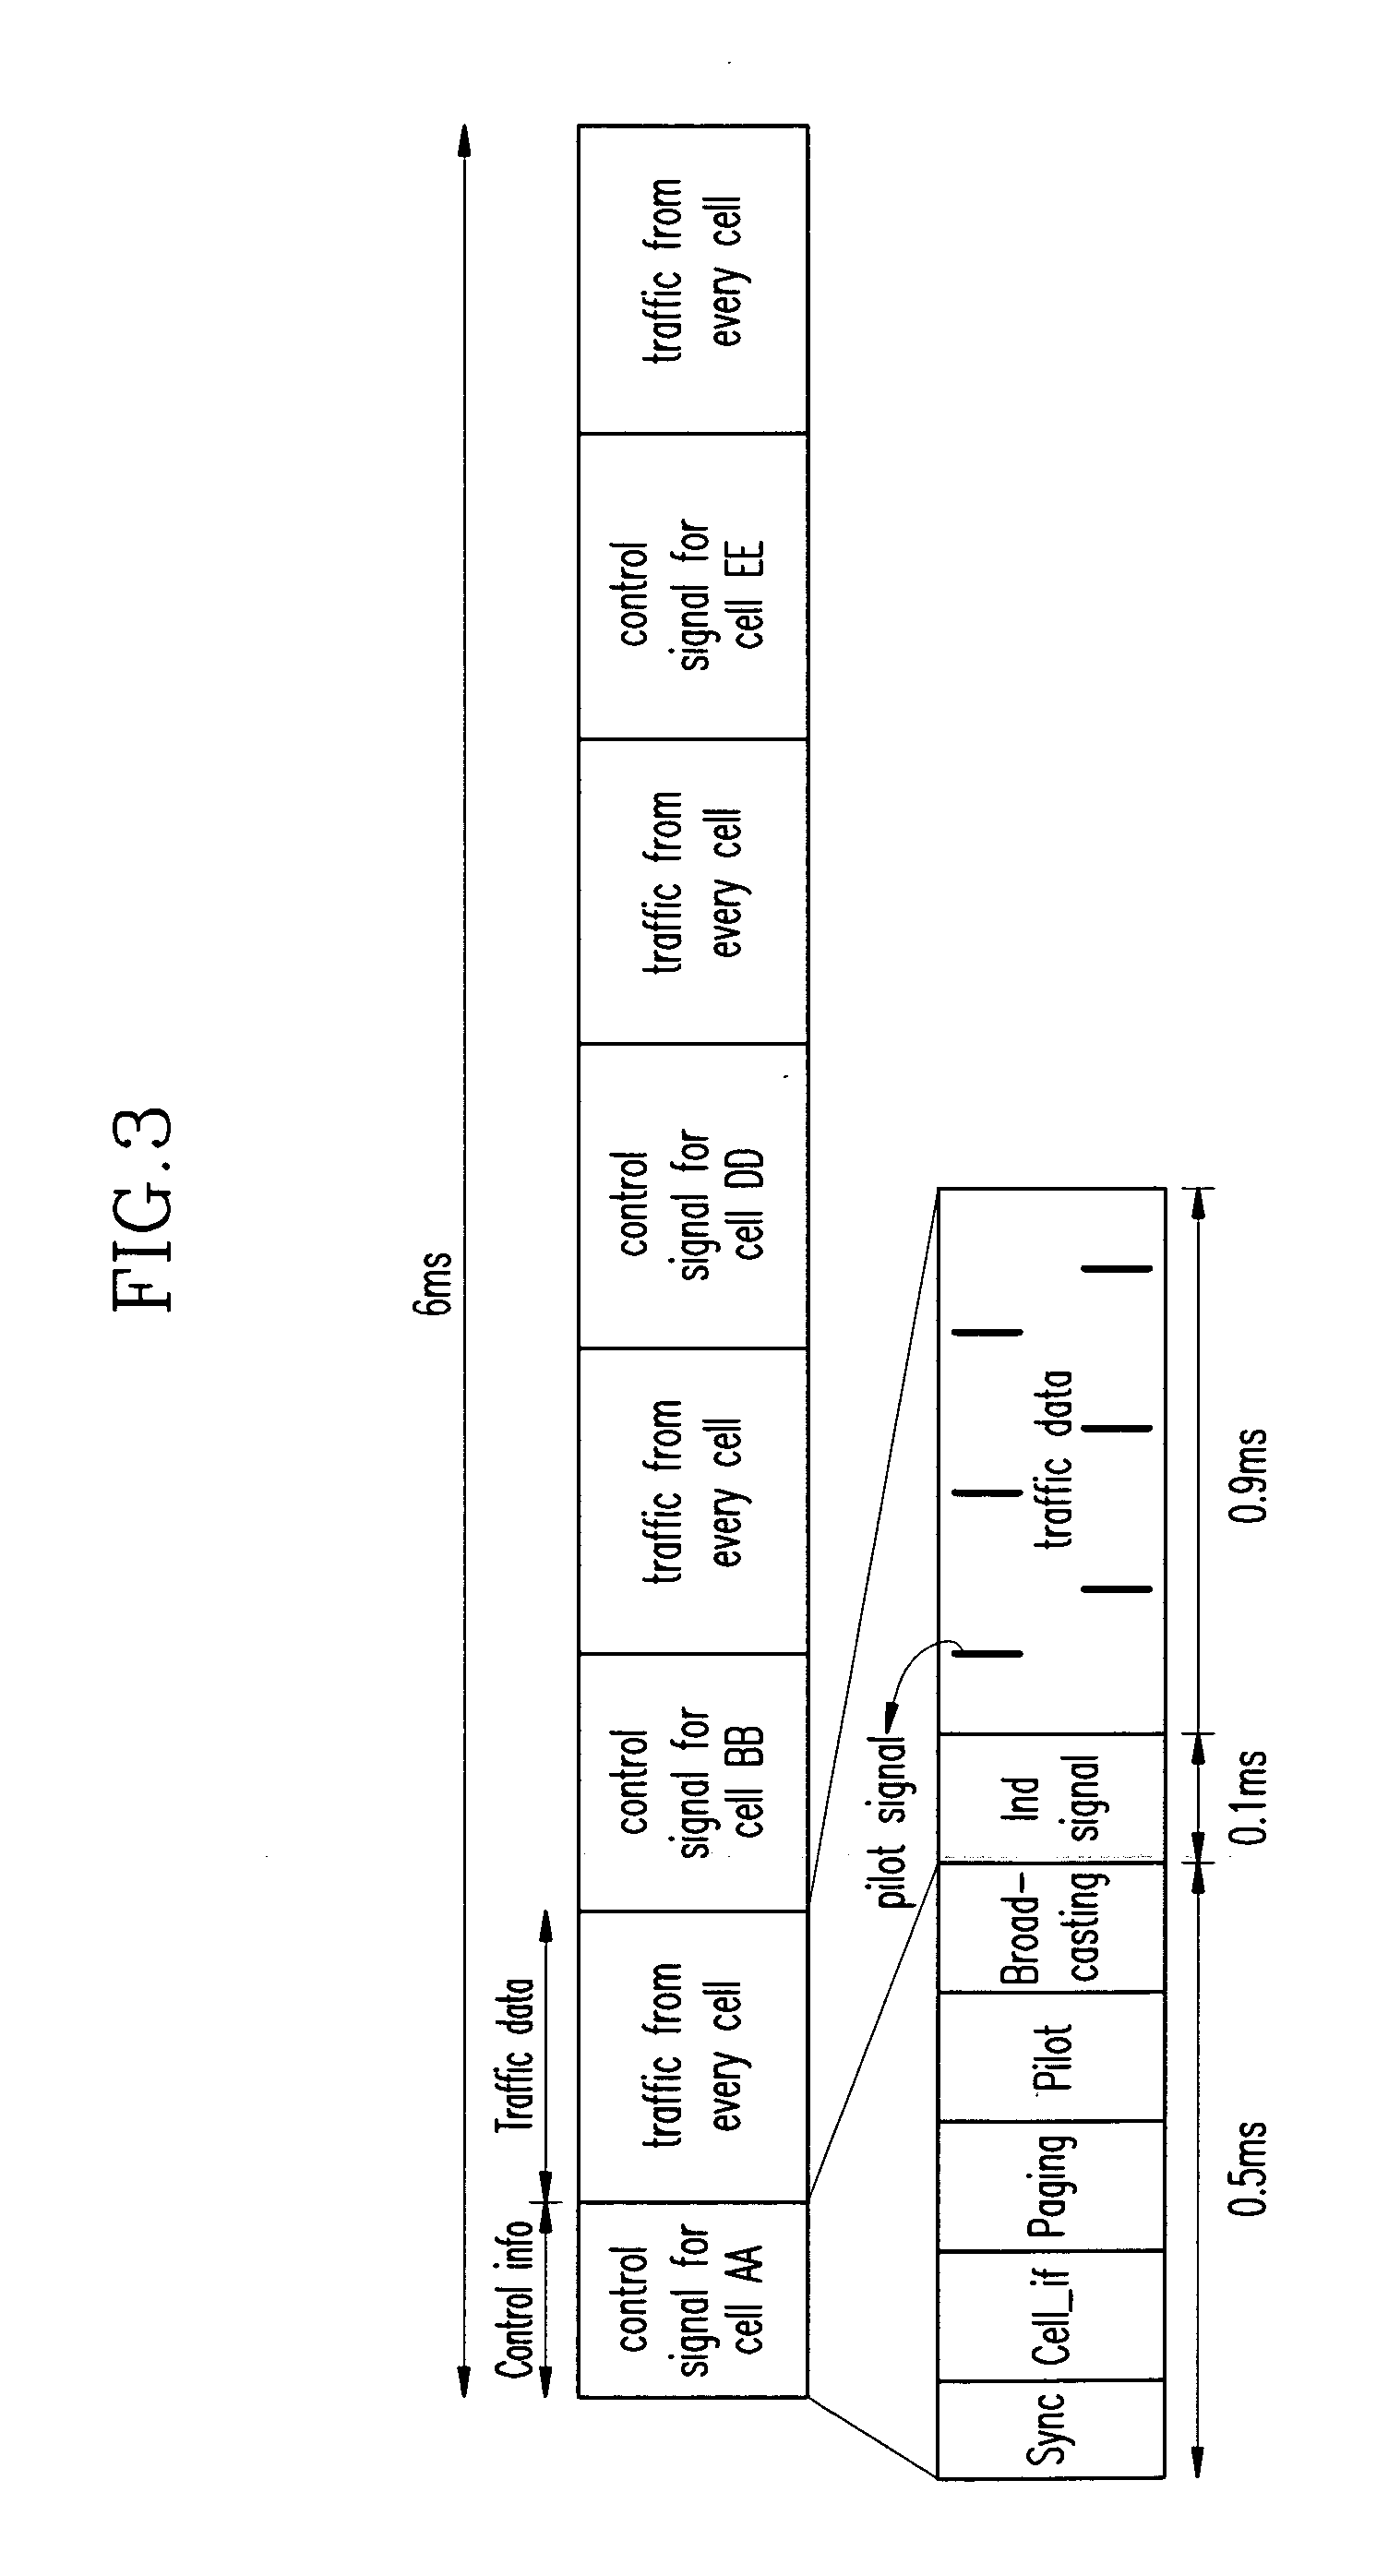 Method for configuring and allocating forward channel in orthogonal frequency division multiple access frequency division duplex system